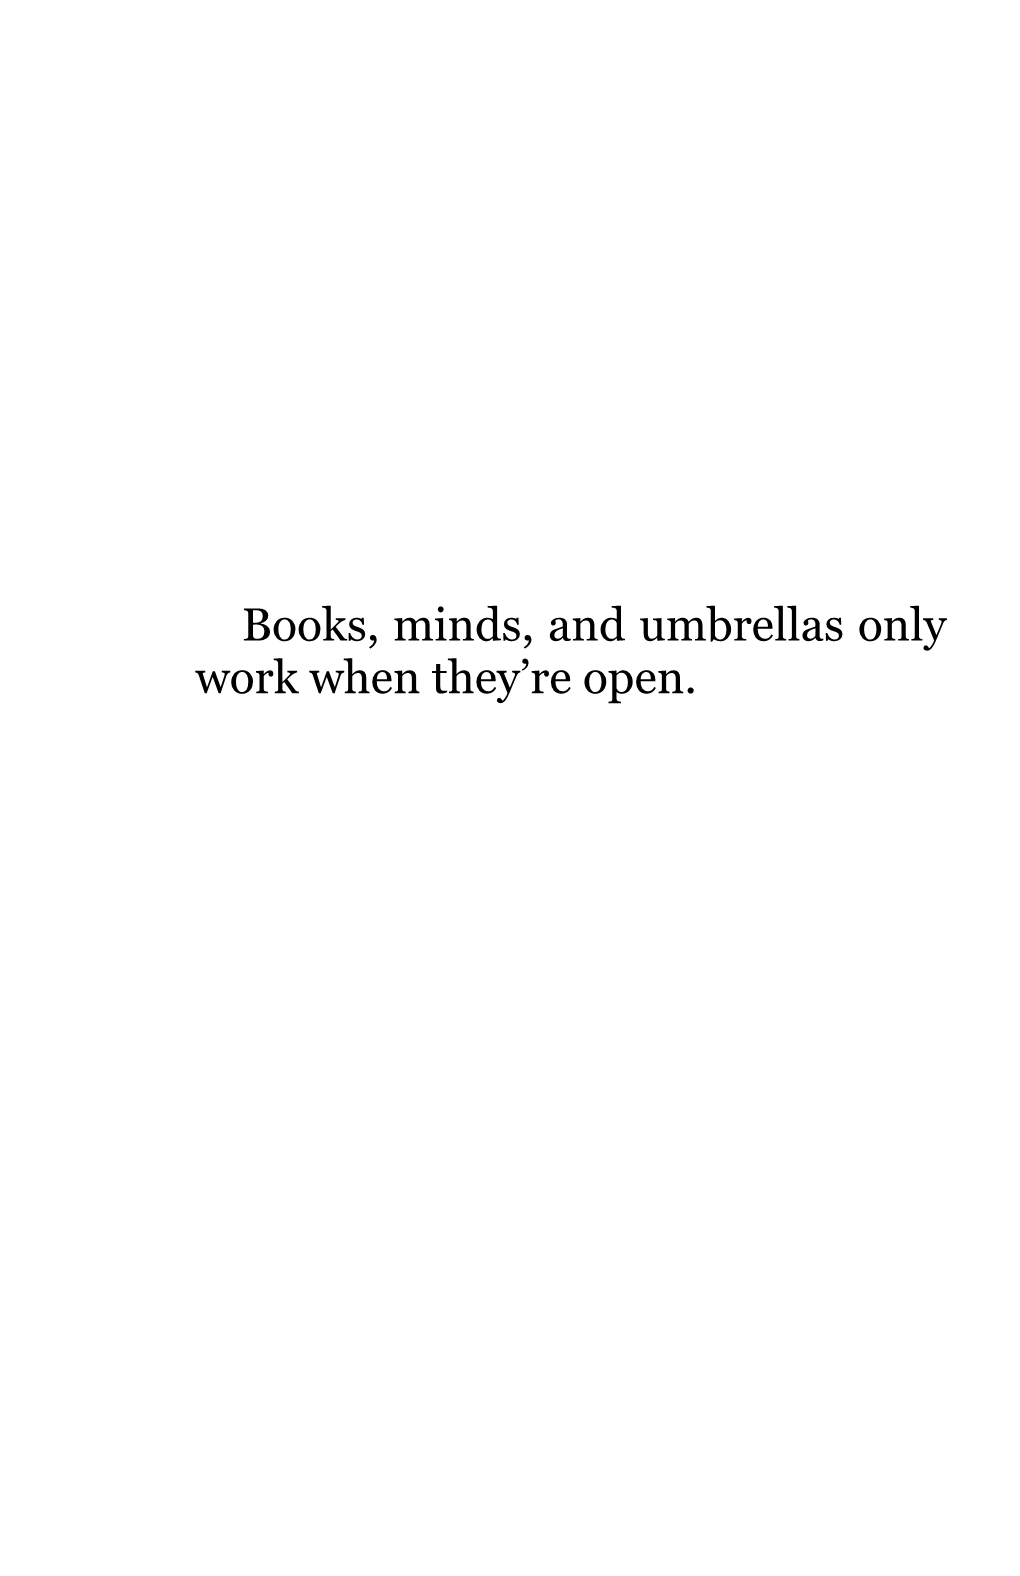 Books, Minds, and Umbrellas Only Work When They're